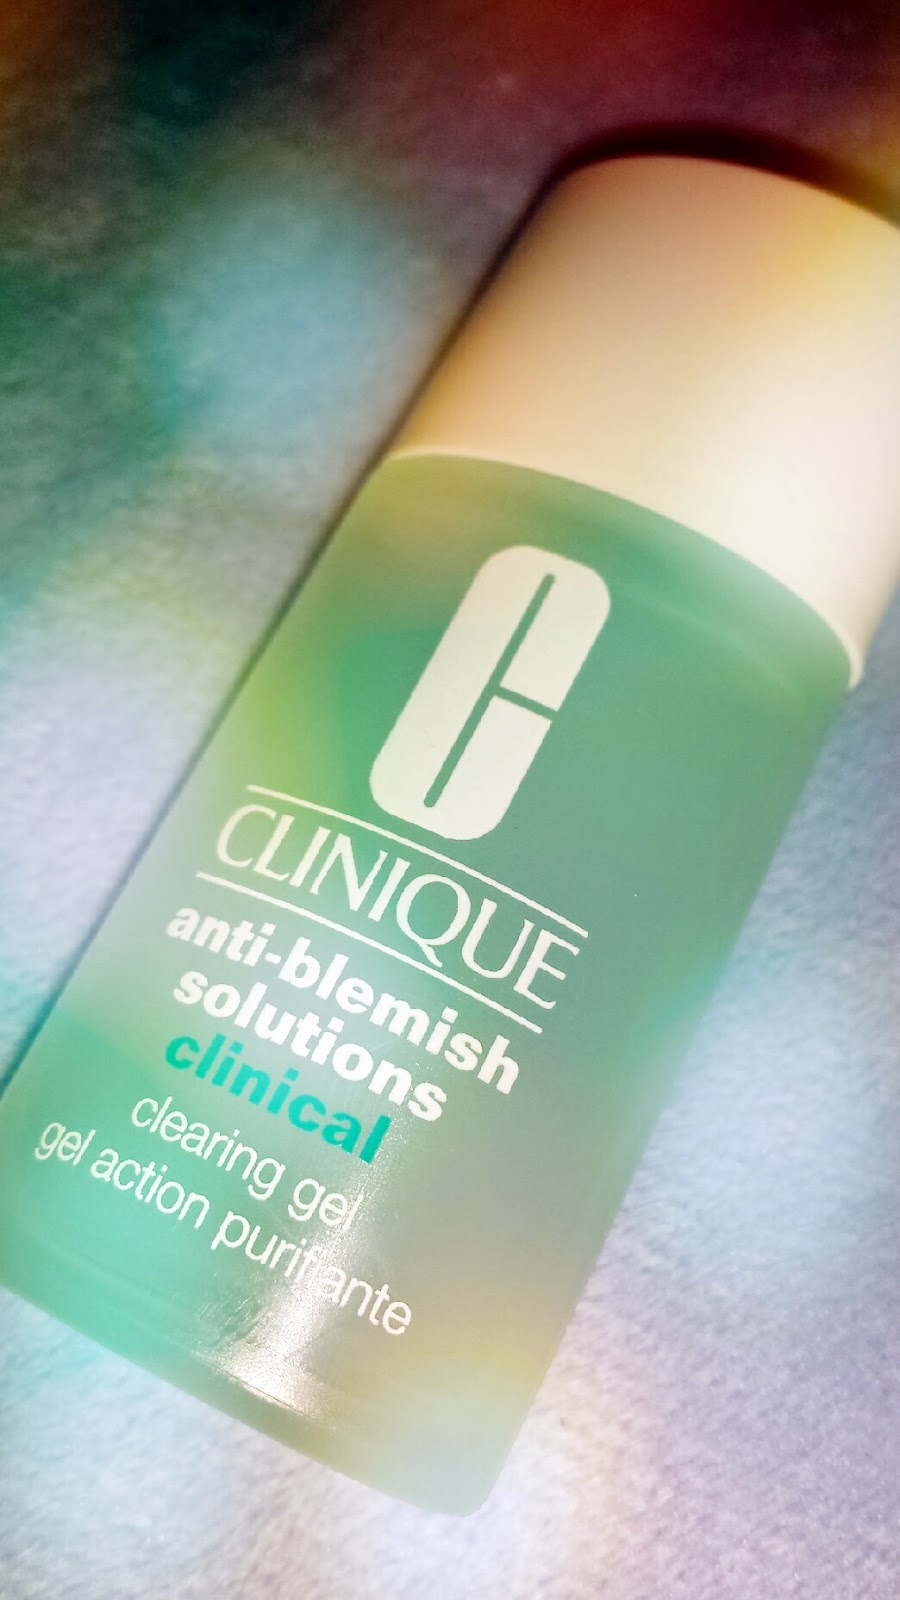 Clinique Anti-Blemish Clinical Clearing Gel